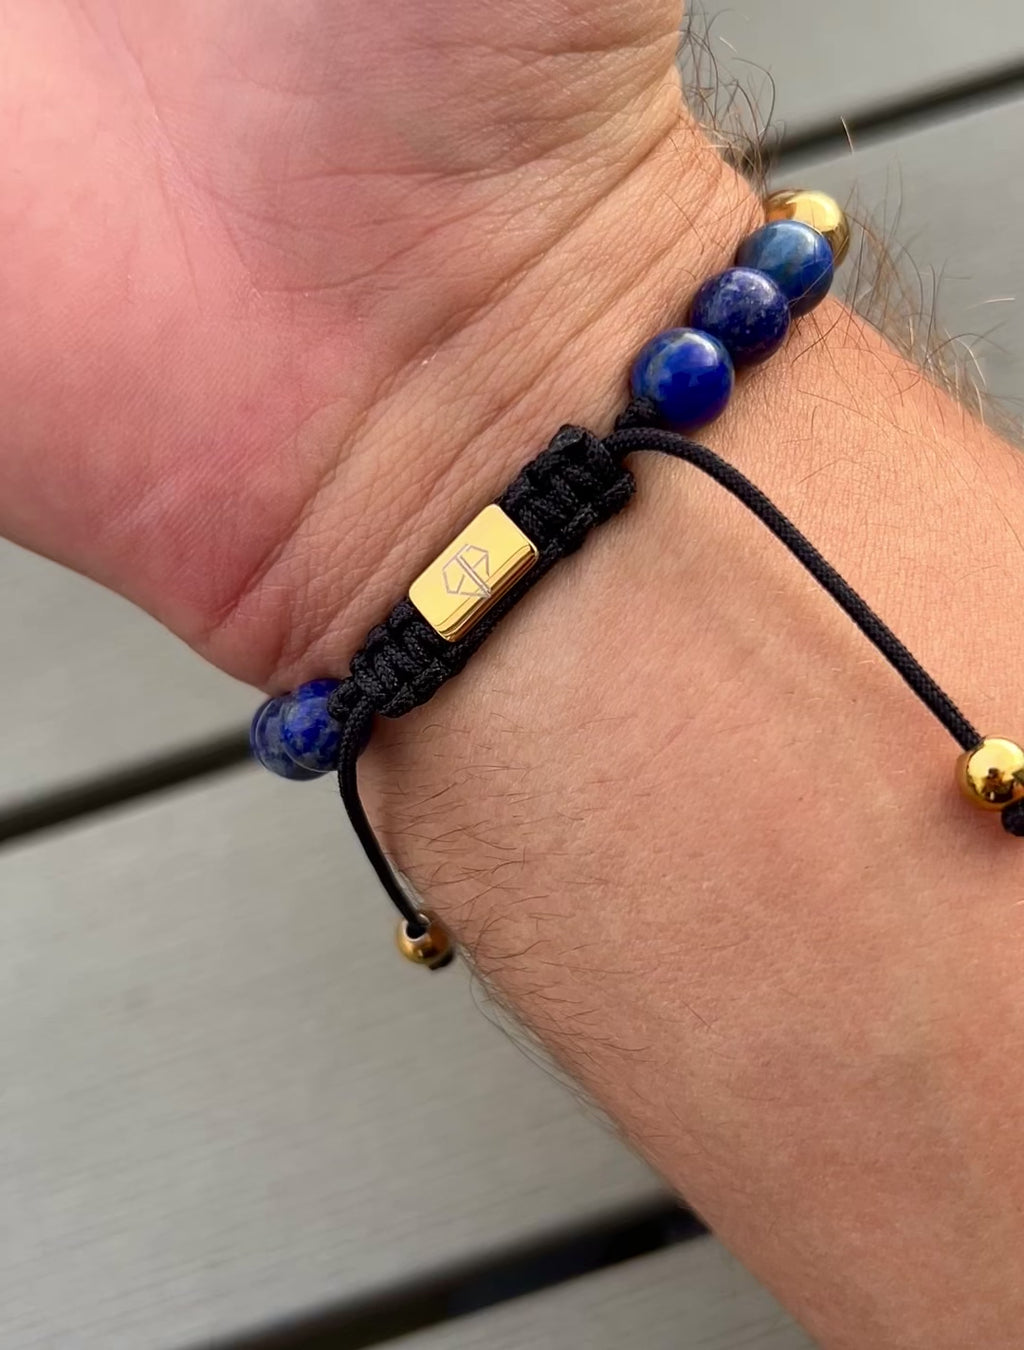 Video showing the Lapis Lazuli beads bracelet with gold plated stainless steel beads Emils Jewellery